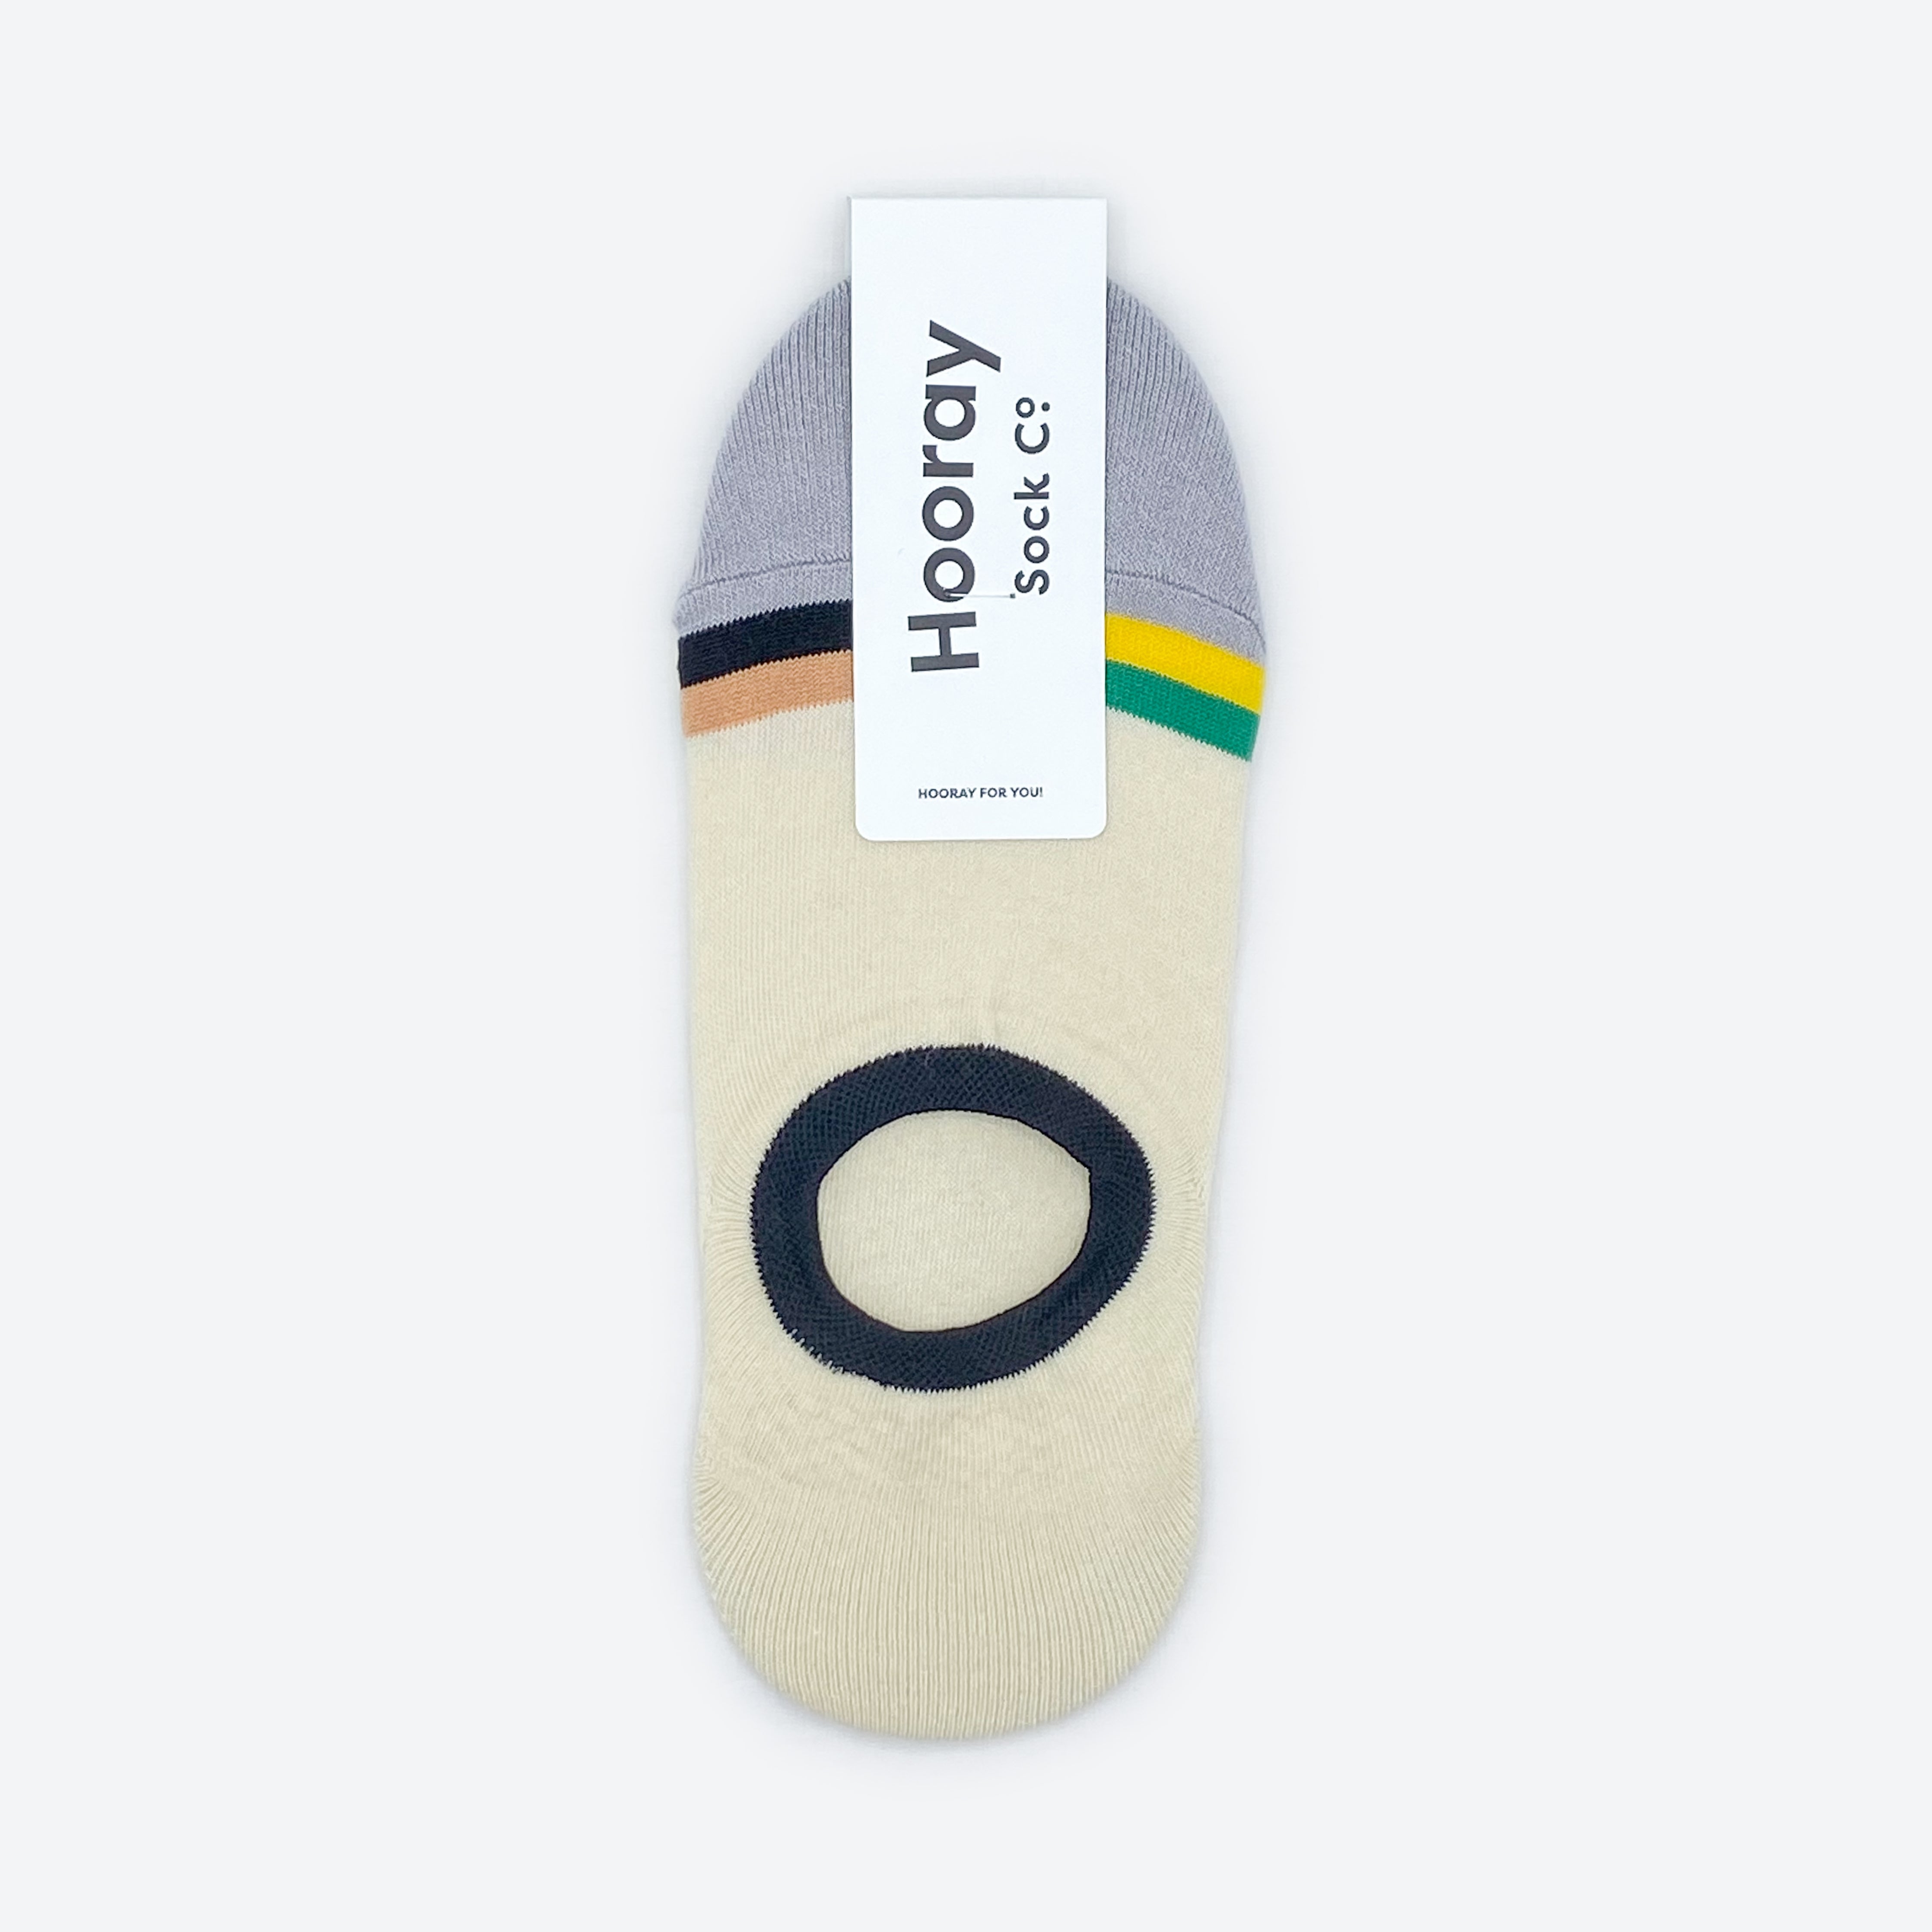 Hooray Sock Co. Marina No Show Socks. Lightweight, minimal, perfect for hot weather. Heel grips for secure fit. Size: Large (US men’s 8-12), Small (US women's 4-10)